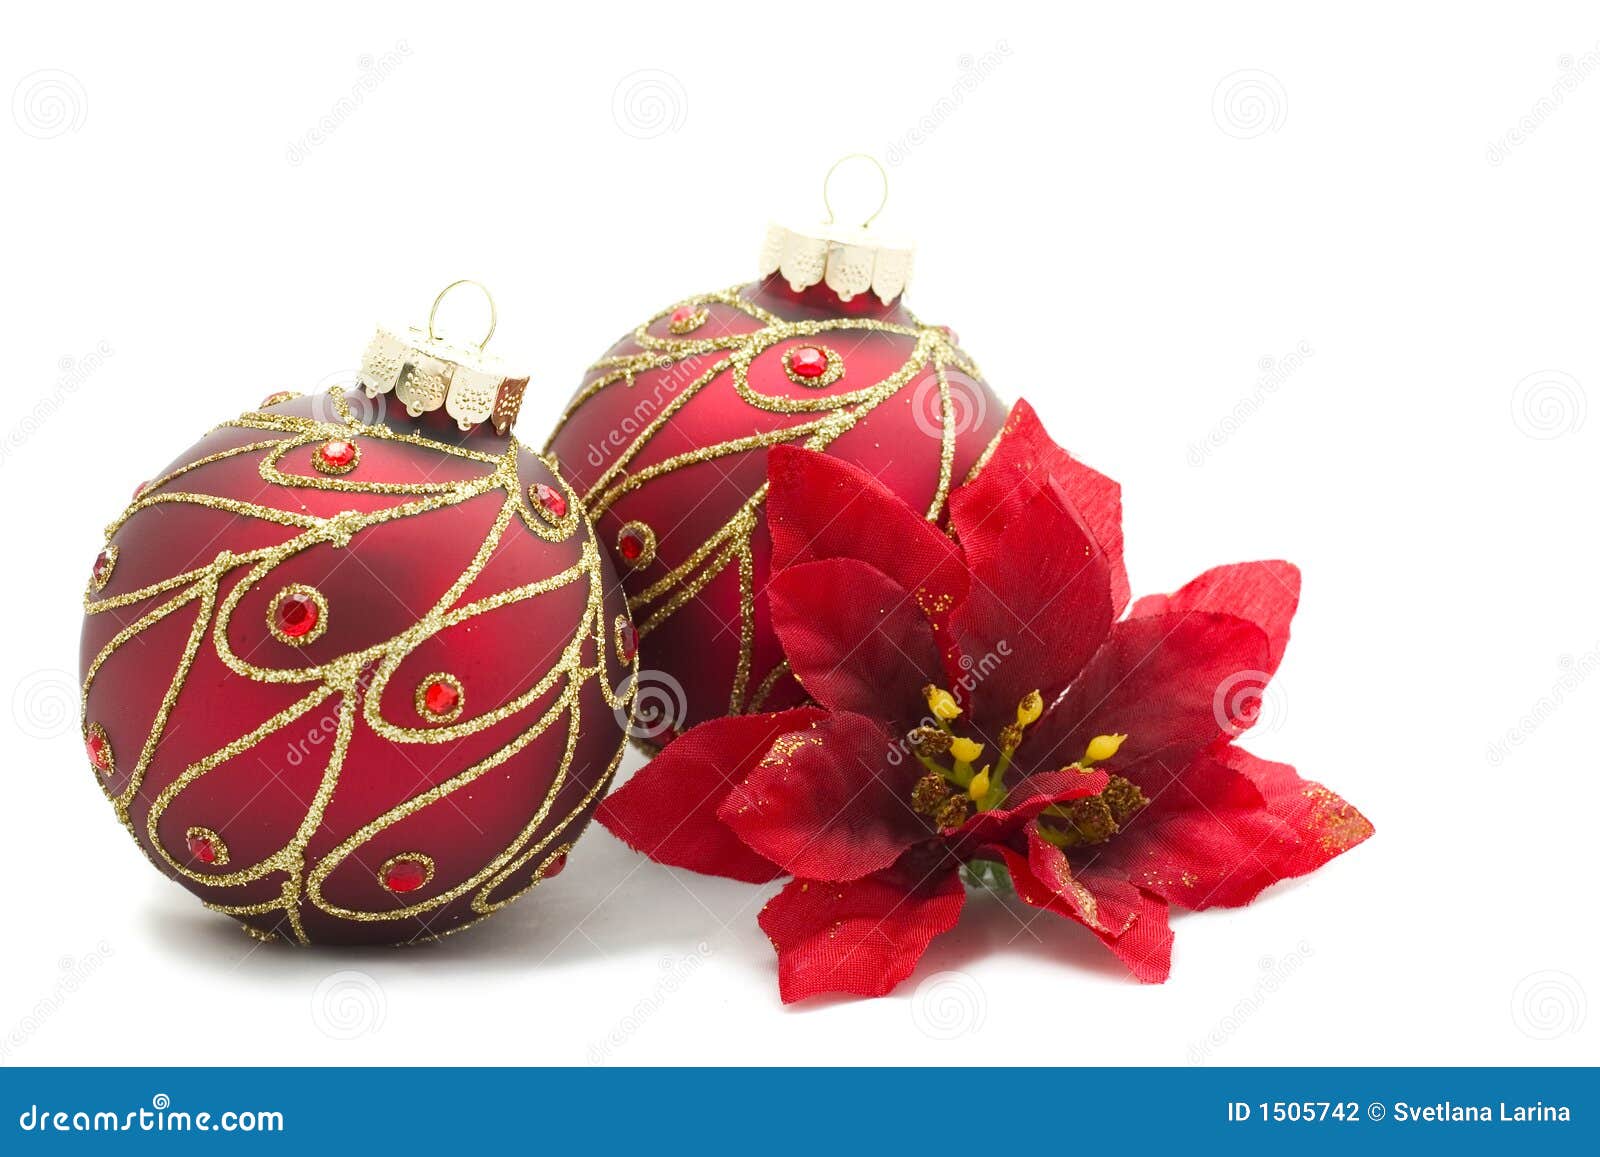 Christmas decorations stock photo. Image of bright, colorful - 1505742